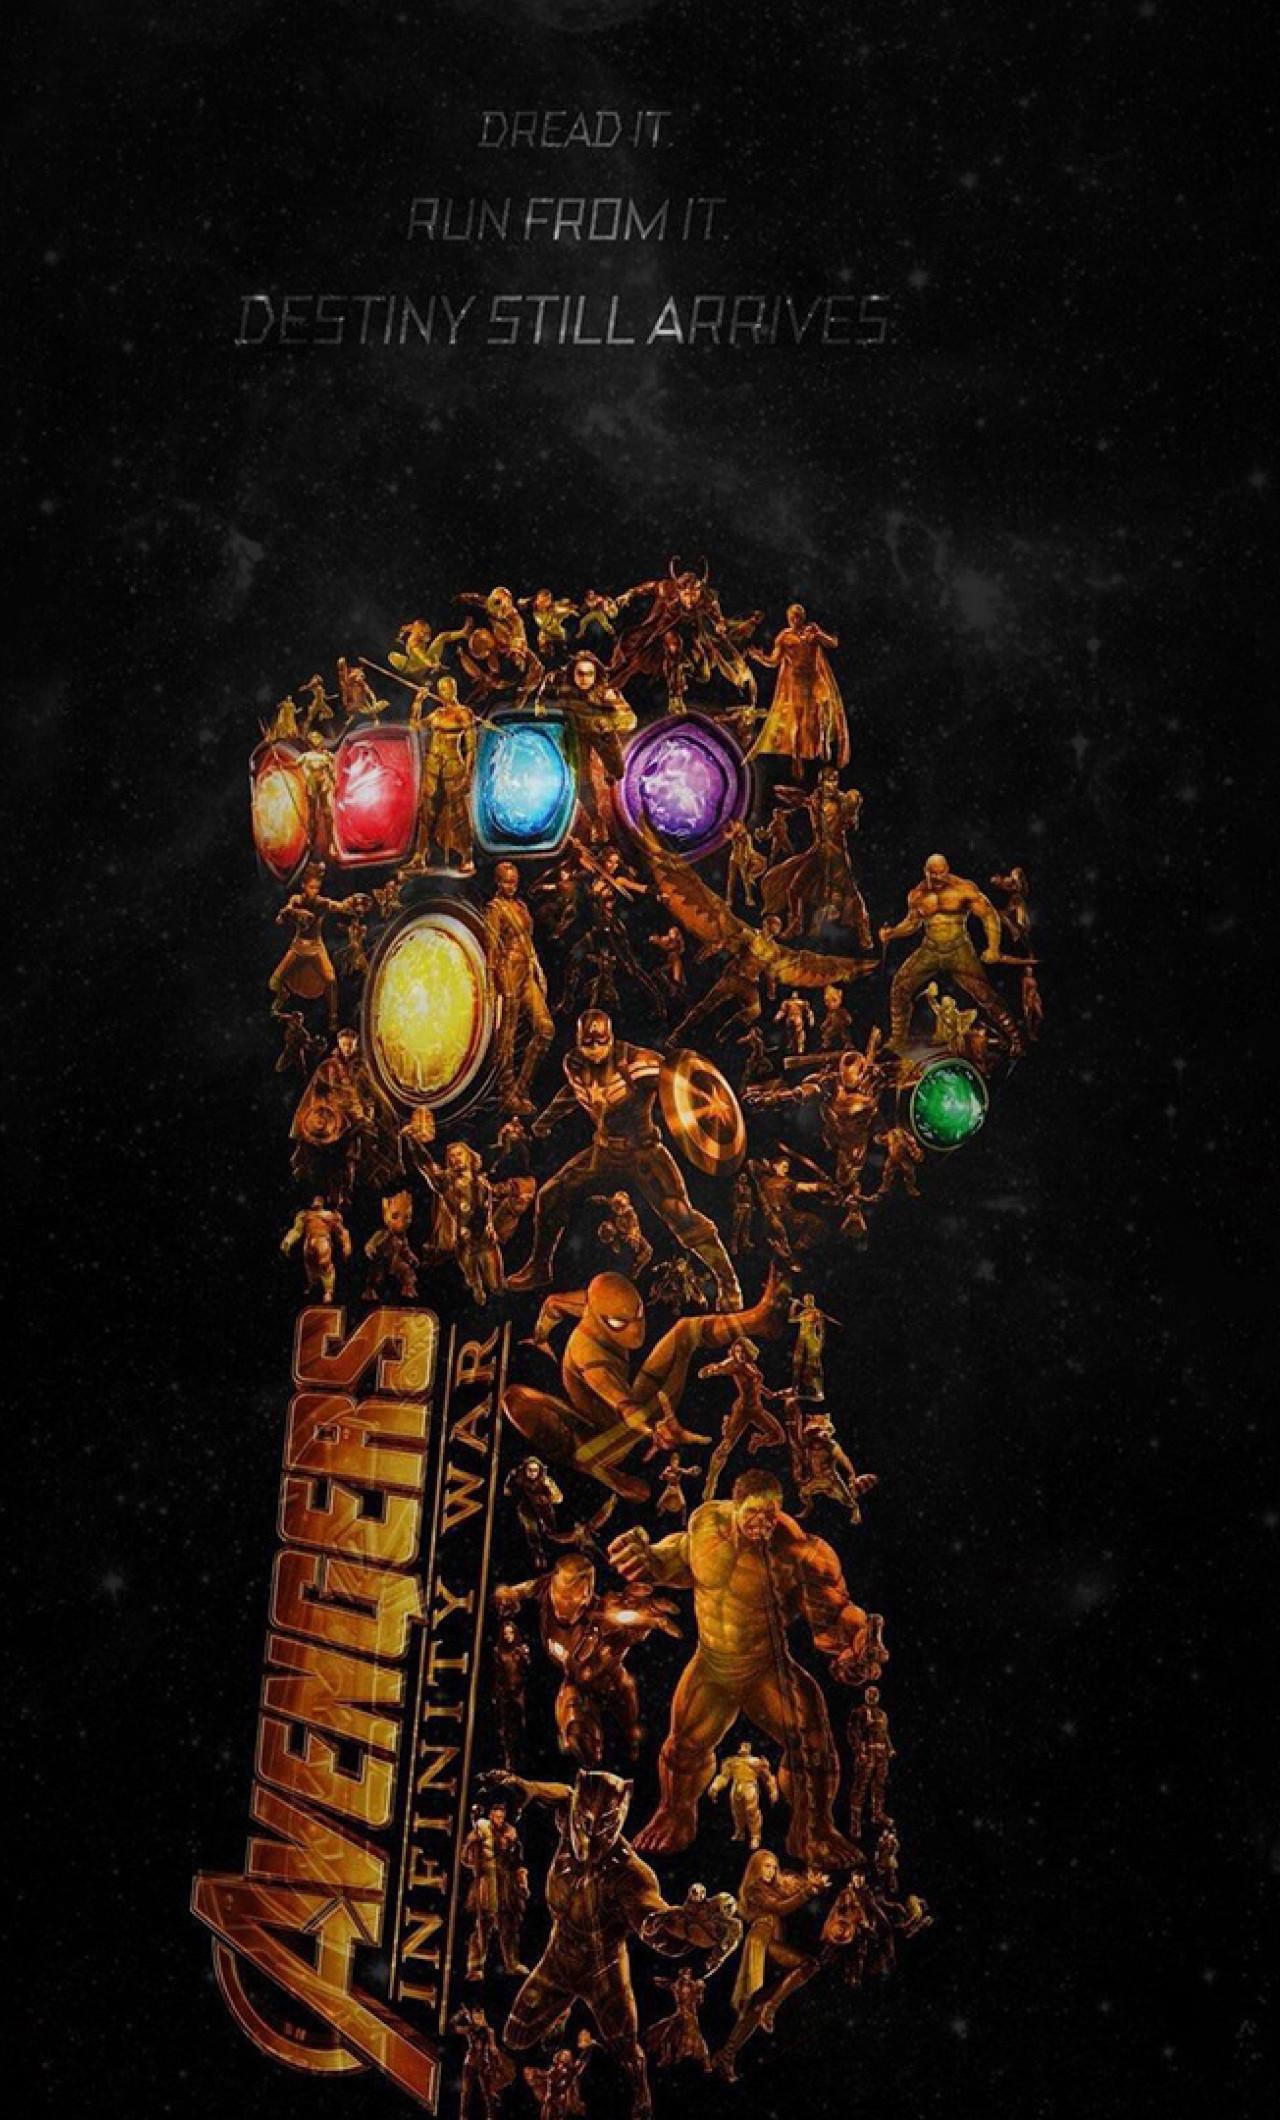 Avengers Infinity War Wallpaper background picture